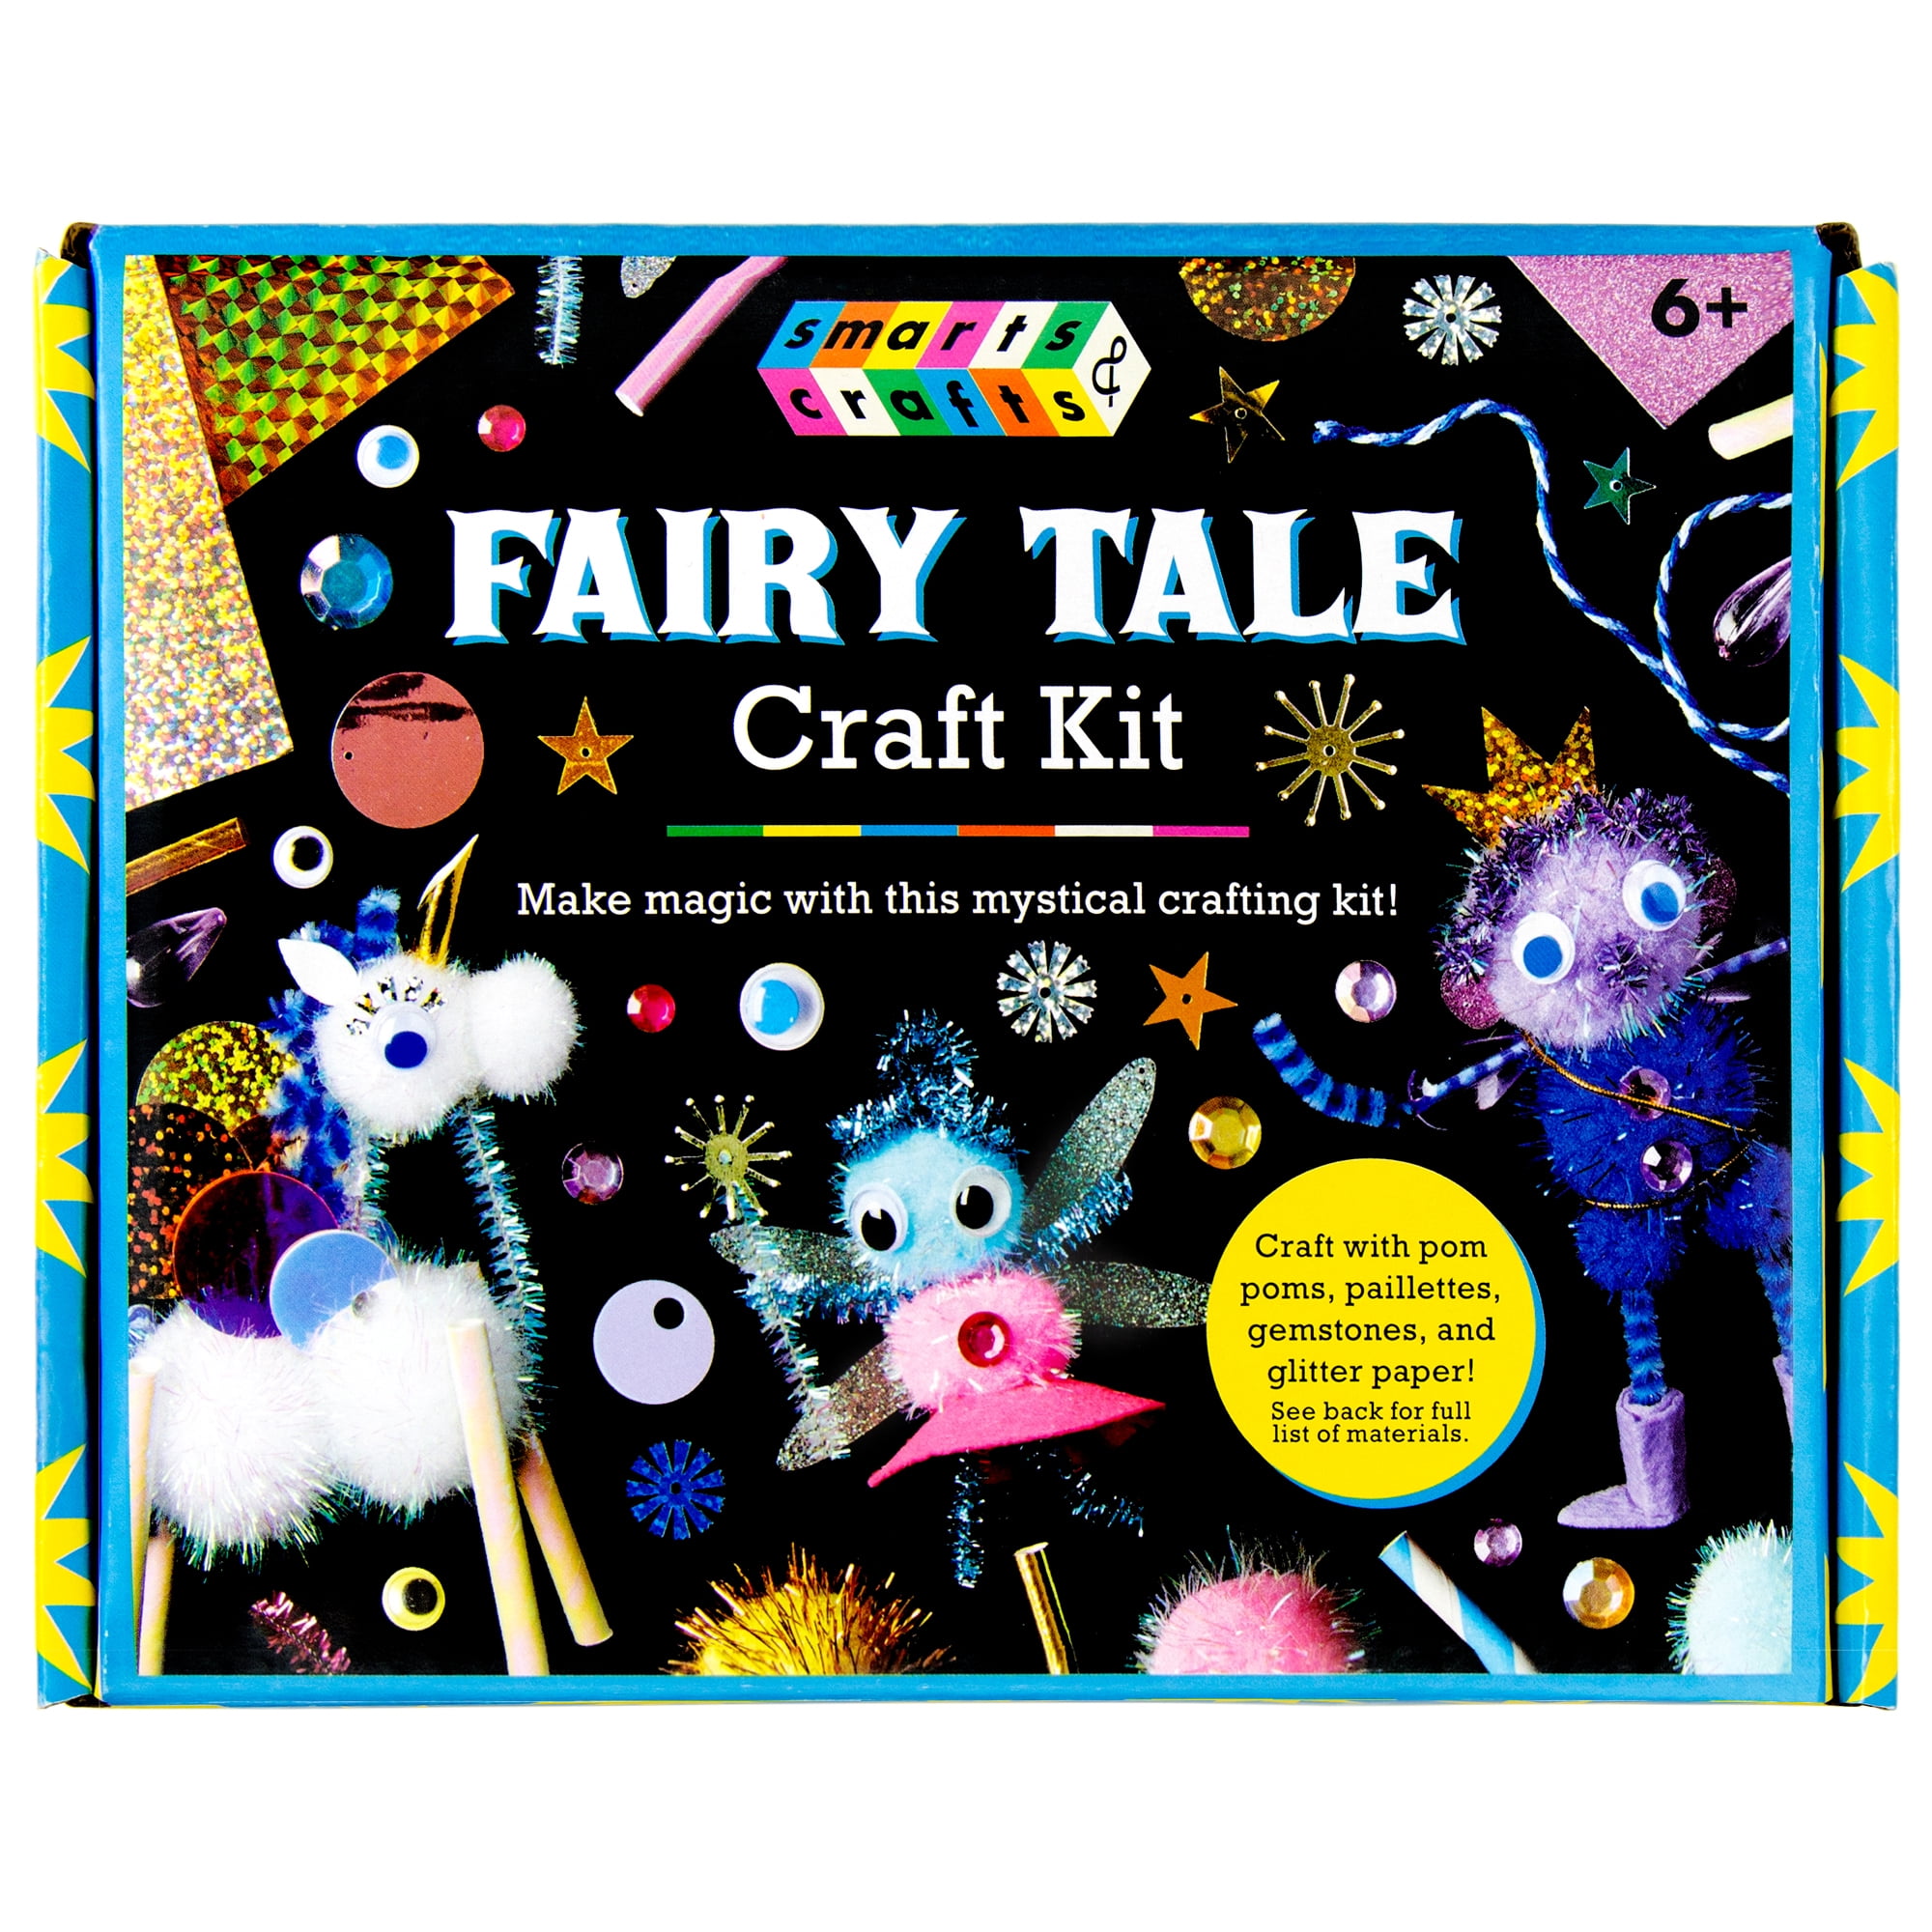 228-Piece Smarts & Crafts Make Your Own Fairy Tale Craft Kit $6.33 + Free S&H w/ Walmart+ or $35+